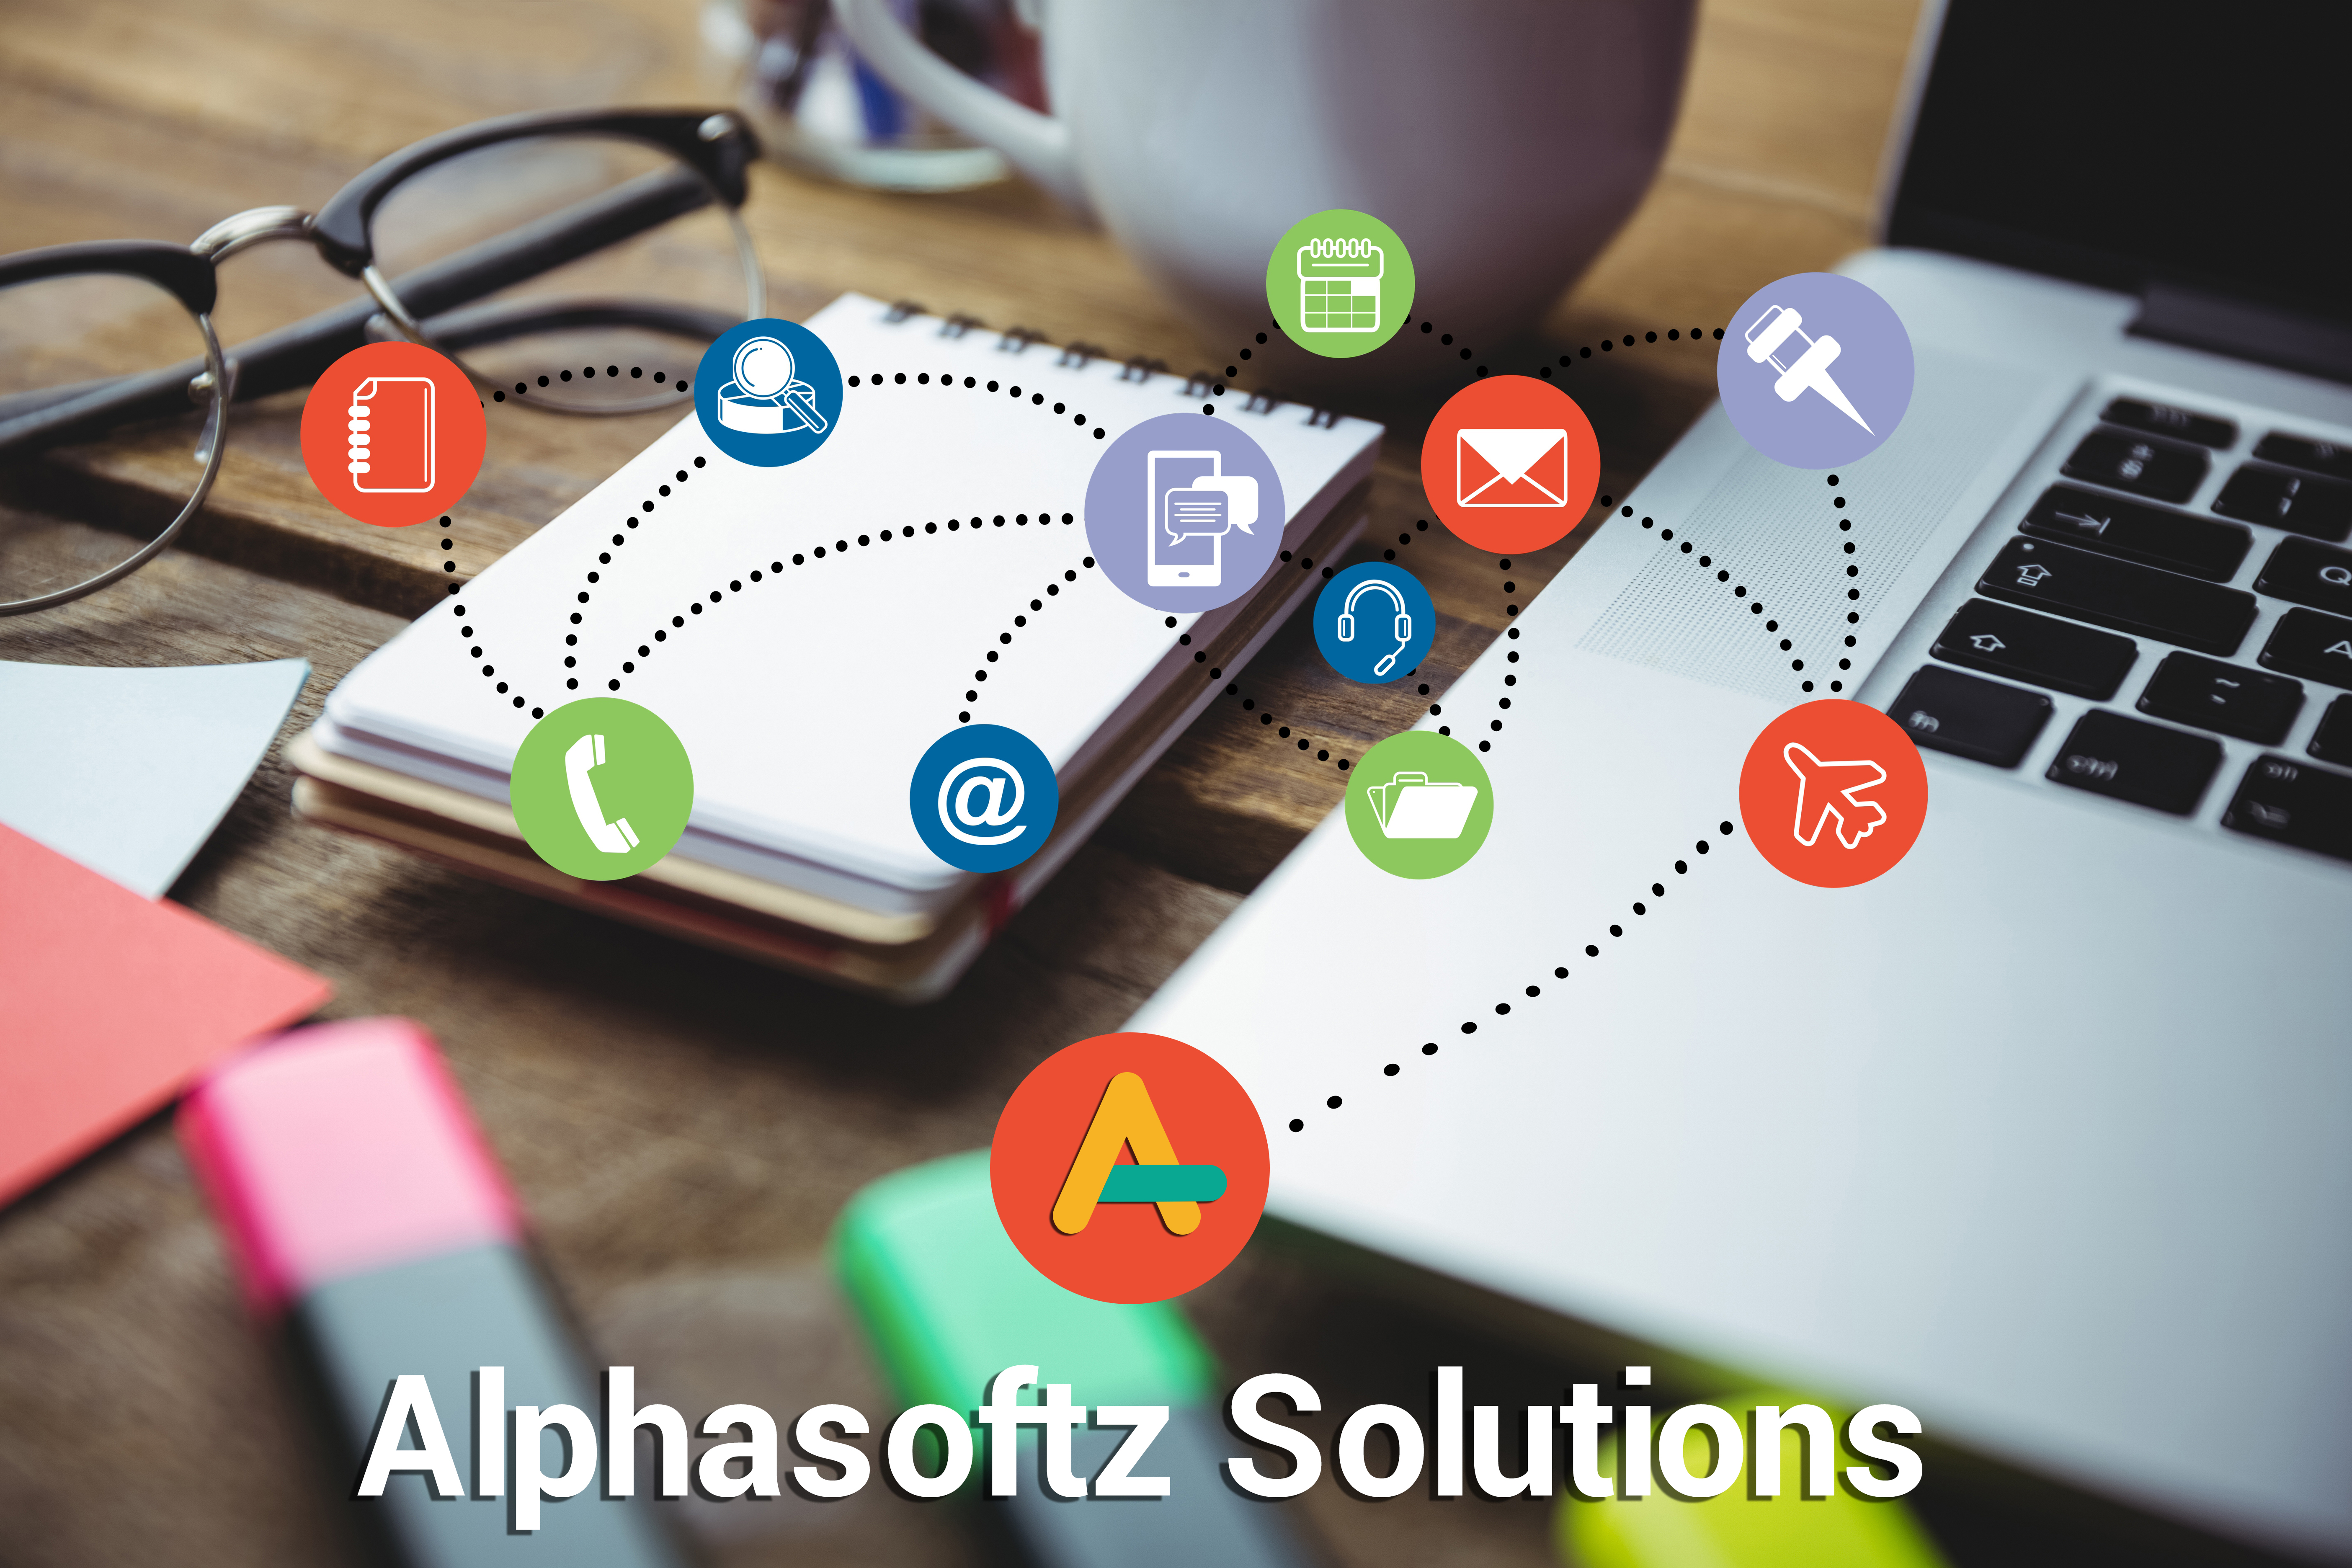 Our Solution Offerings Are In The Areas Of Enterprise Solutions, Cloud Applications, And Mobile Apps.